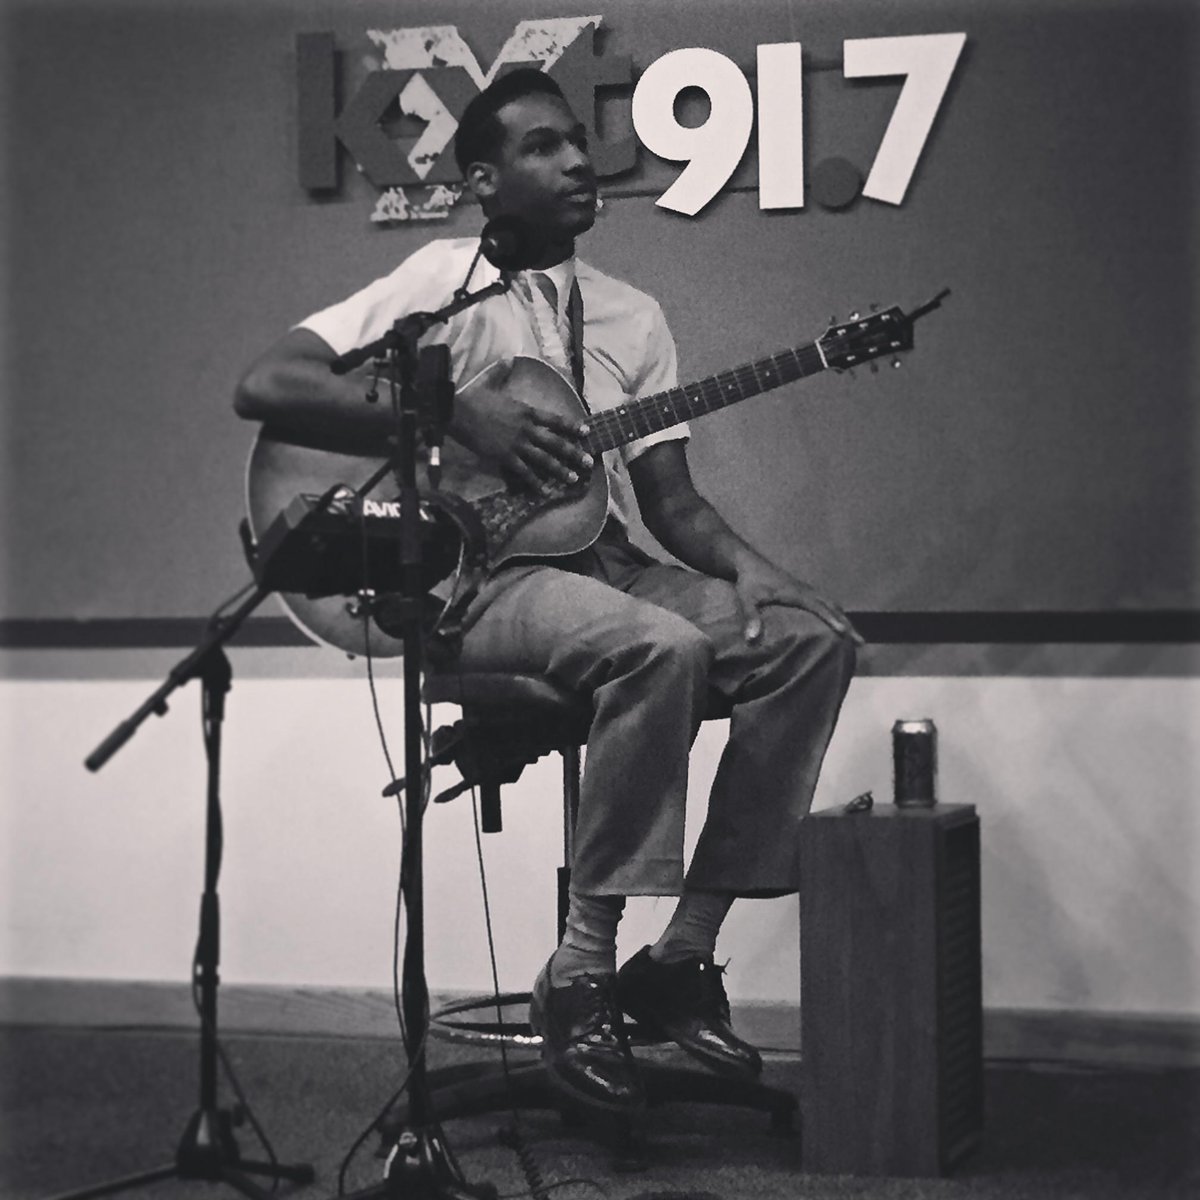 Tune in for a live session with #FortWorth's own @leonbridges, coming up at 3:30 on KXT 91.7.